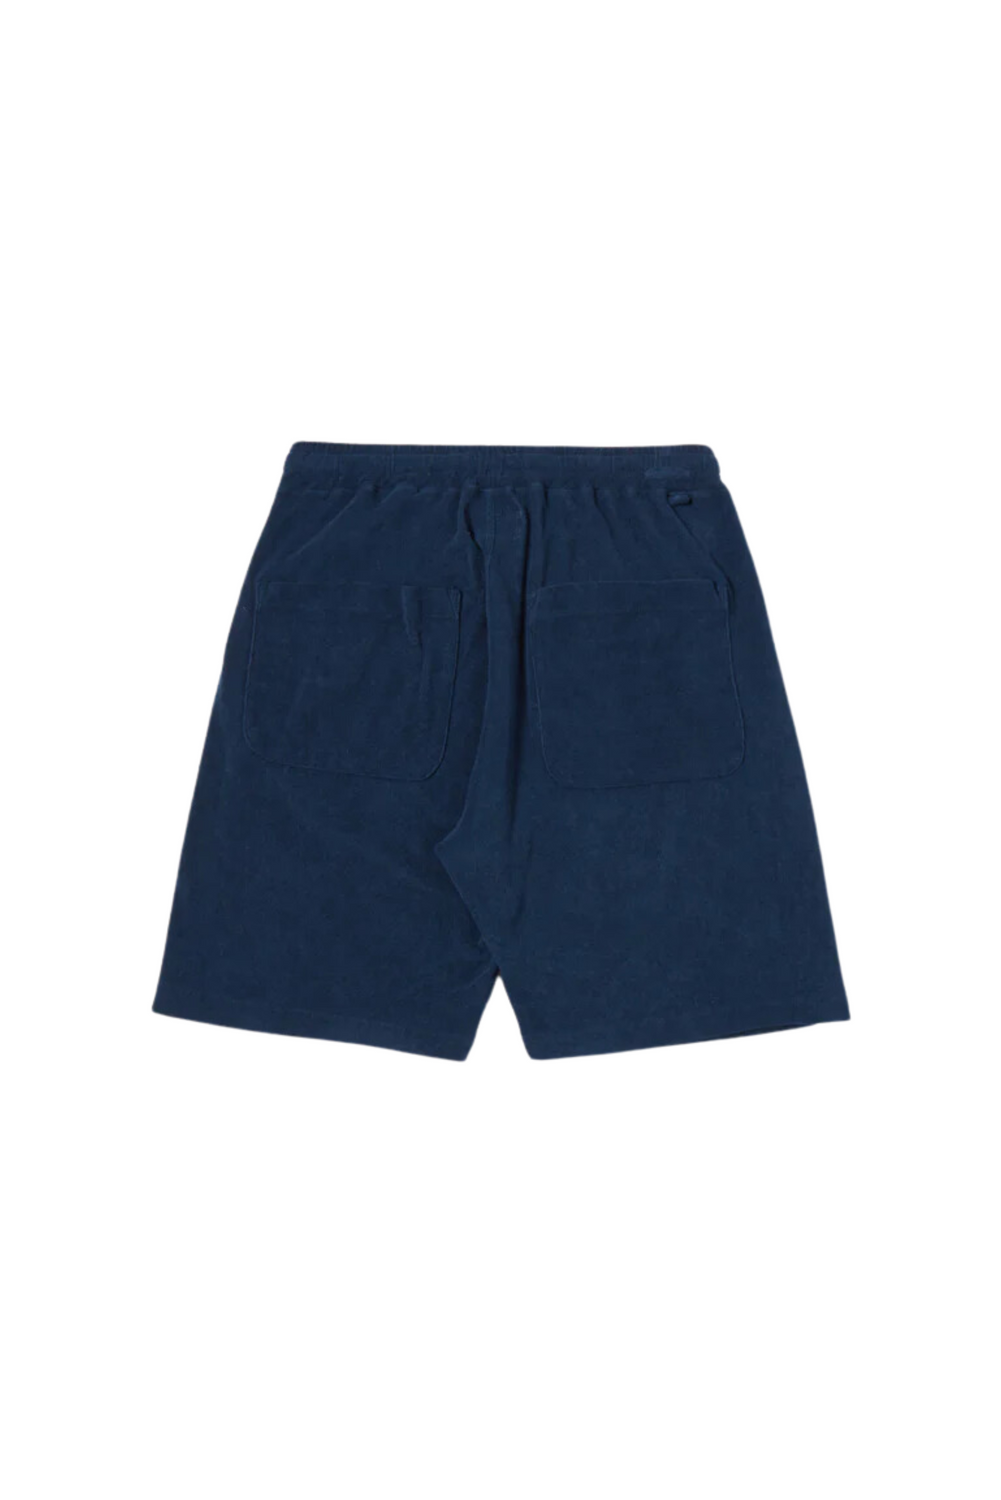 Shorts by Universal Works